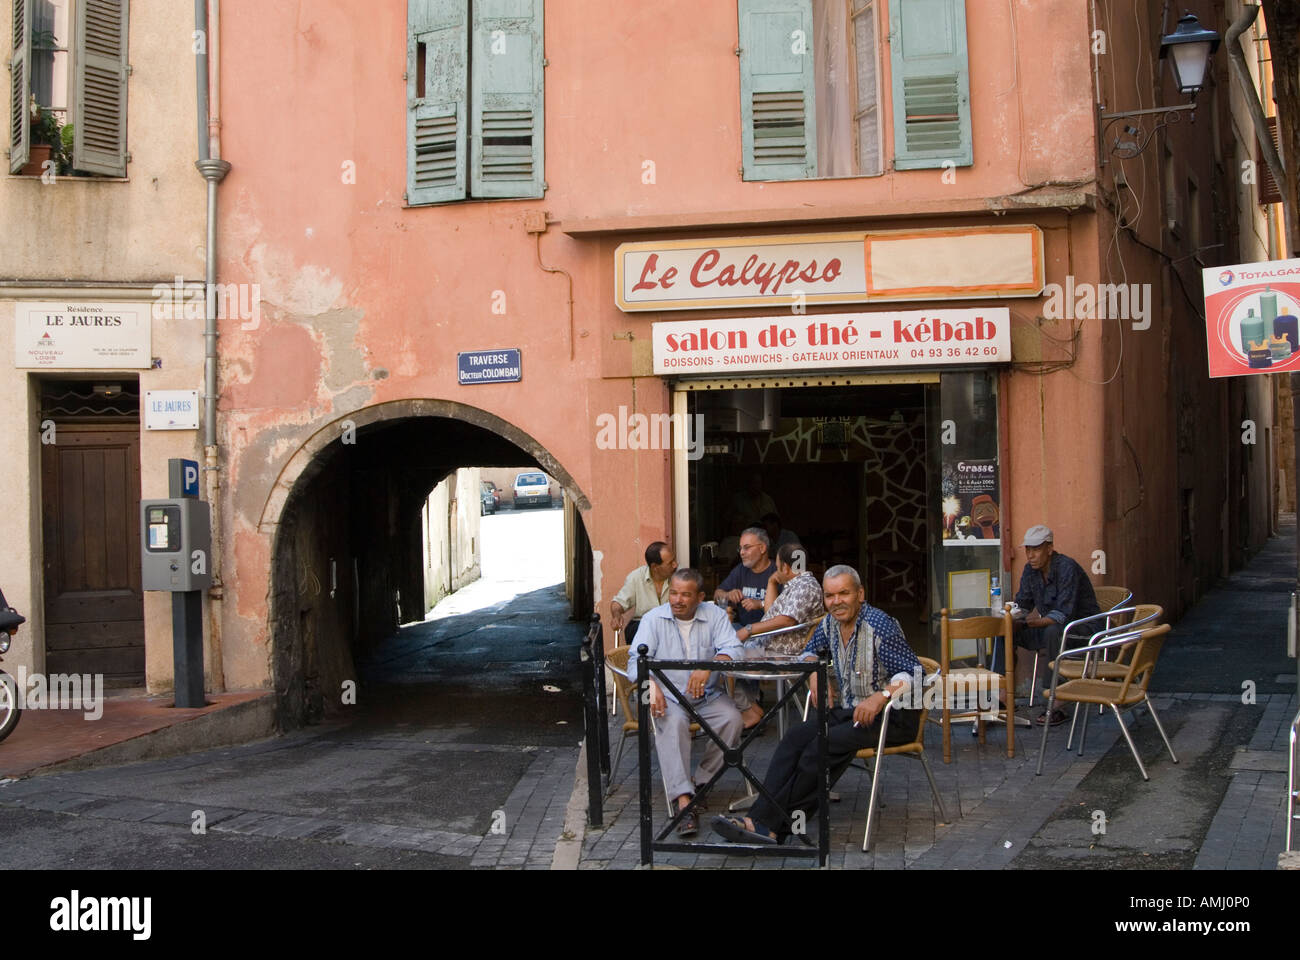 North African cafe in the old part of town of Grasse, France Stock Photo